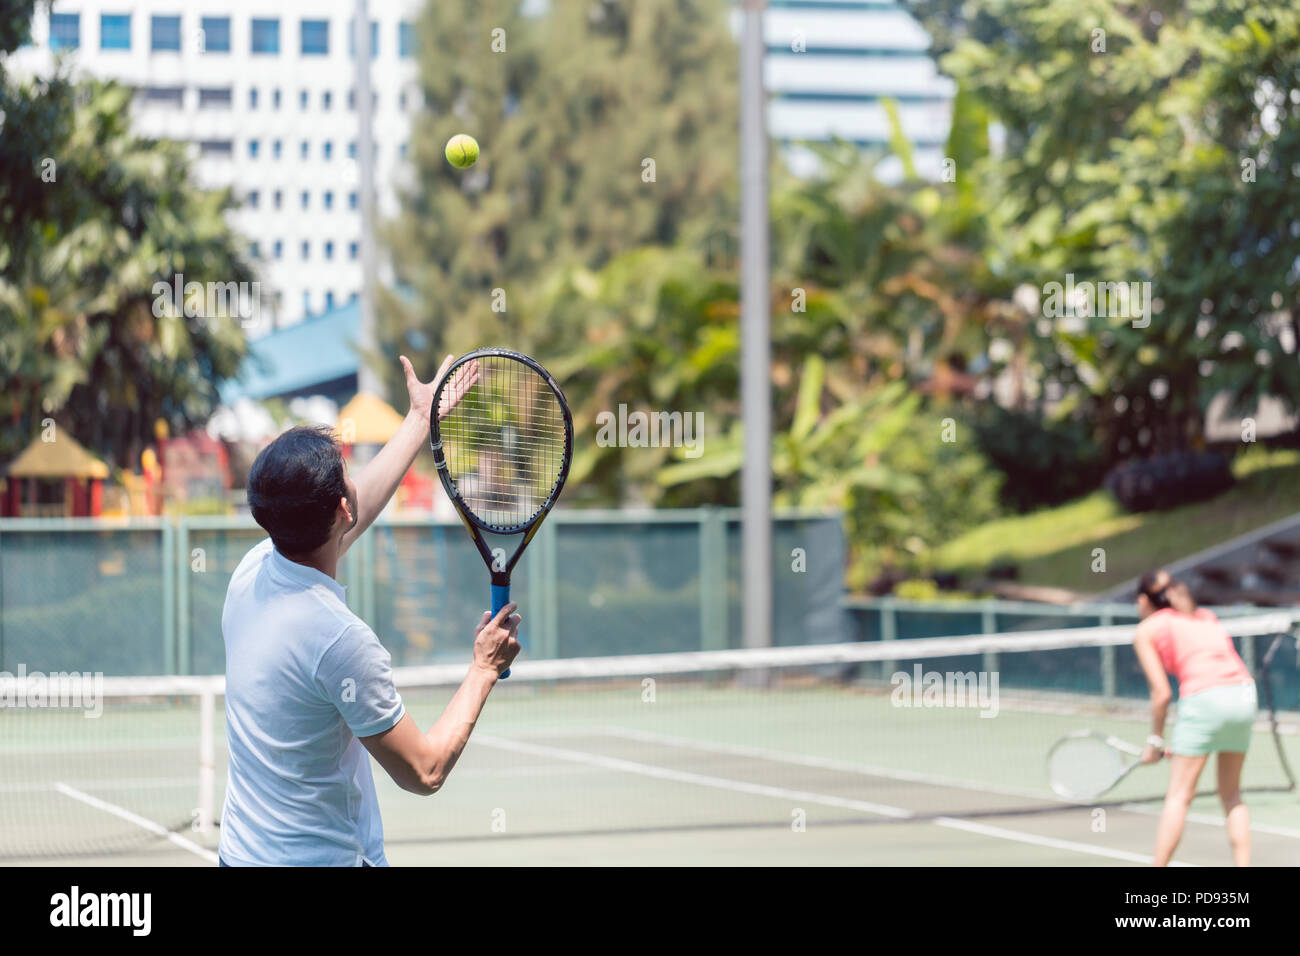 Rear view of a man ready to serve during doubles match Stock Photo